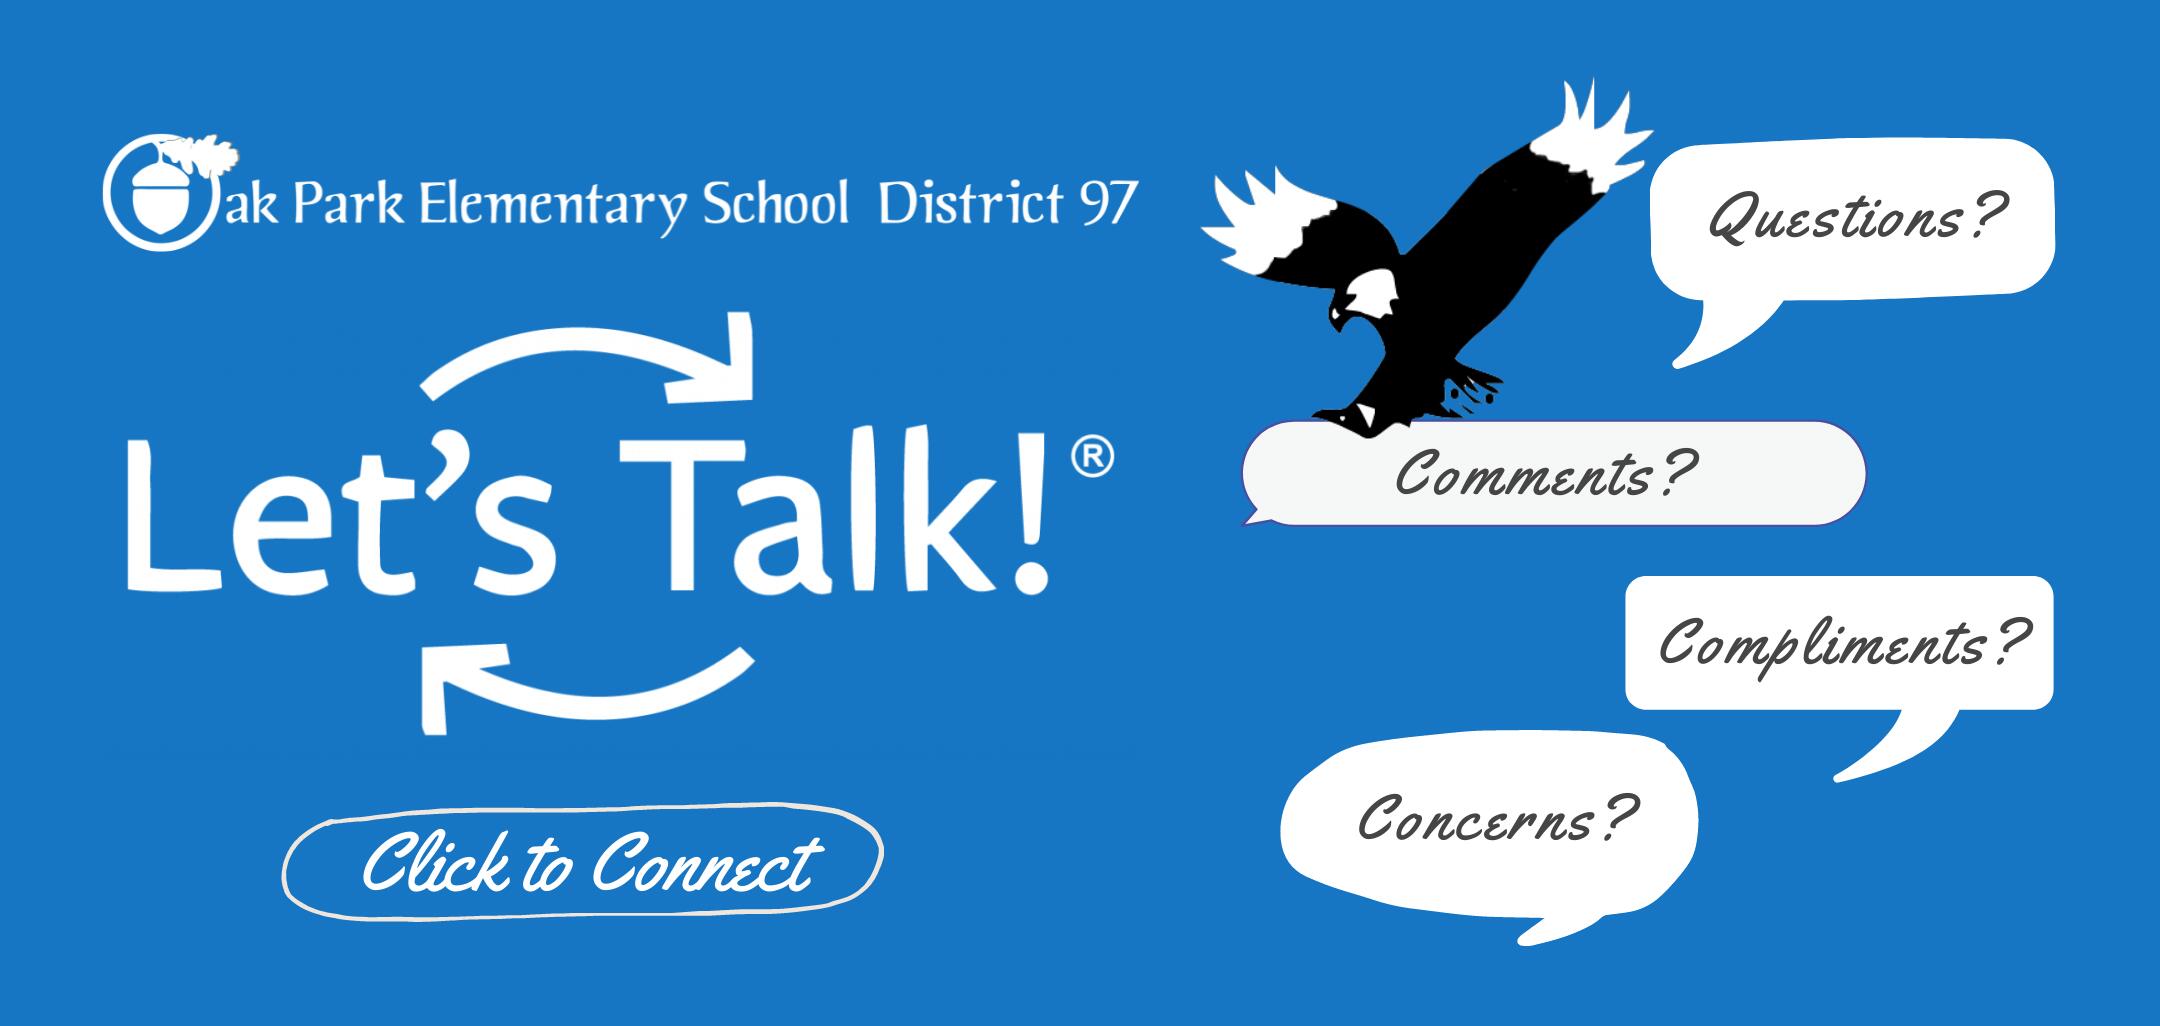 Click here to access District 97's Let's Talk Page